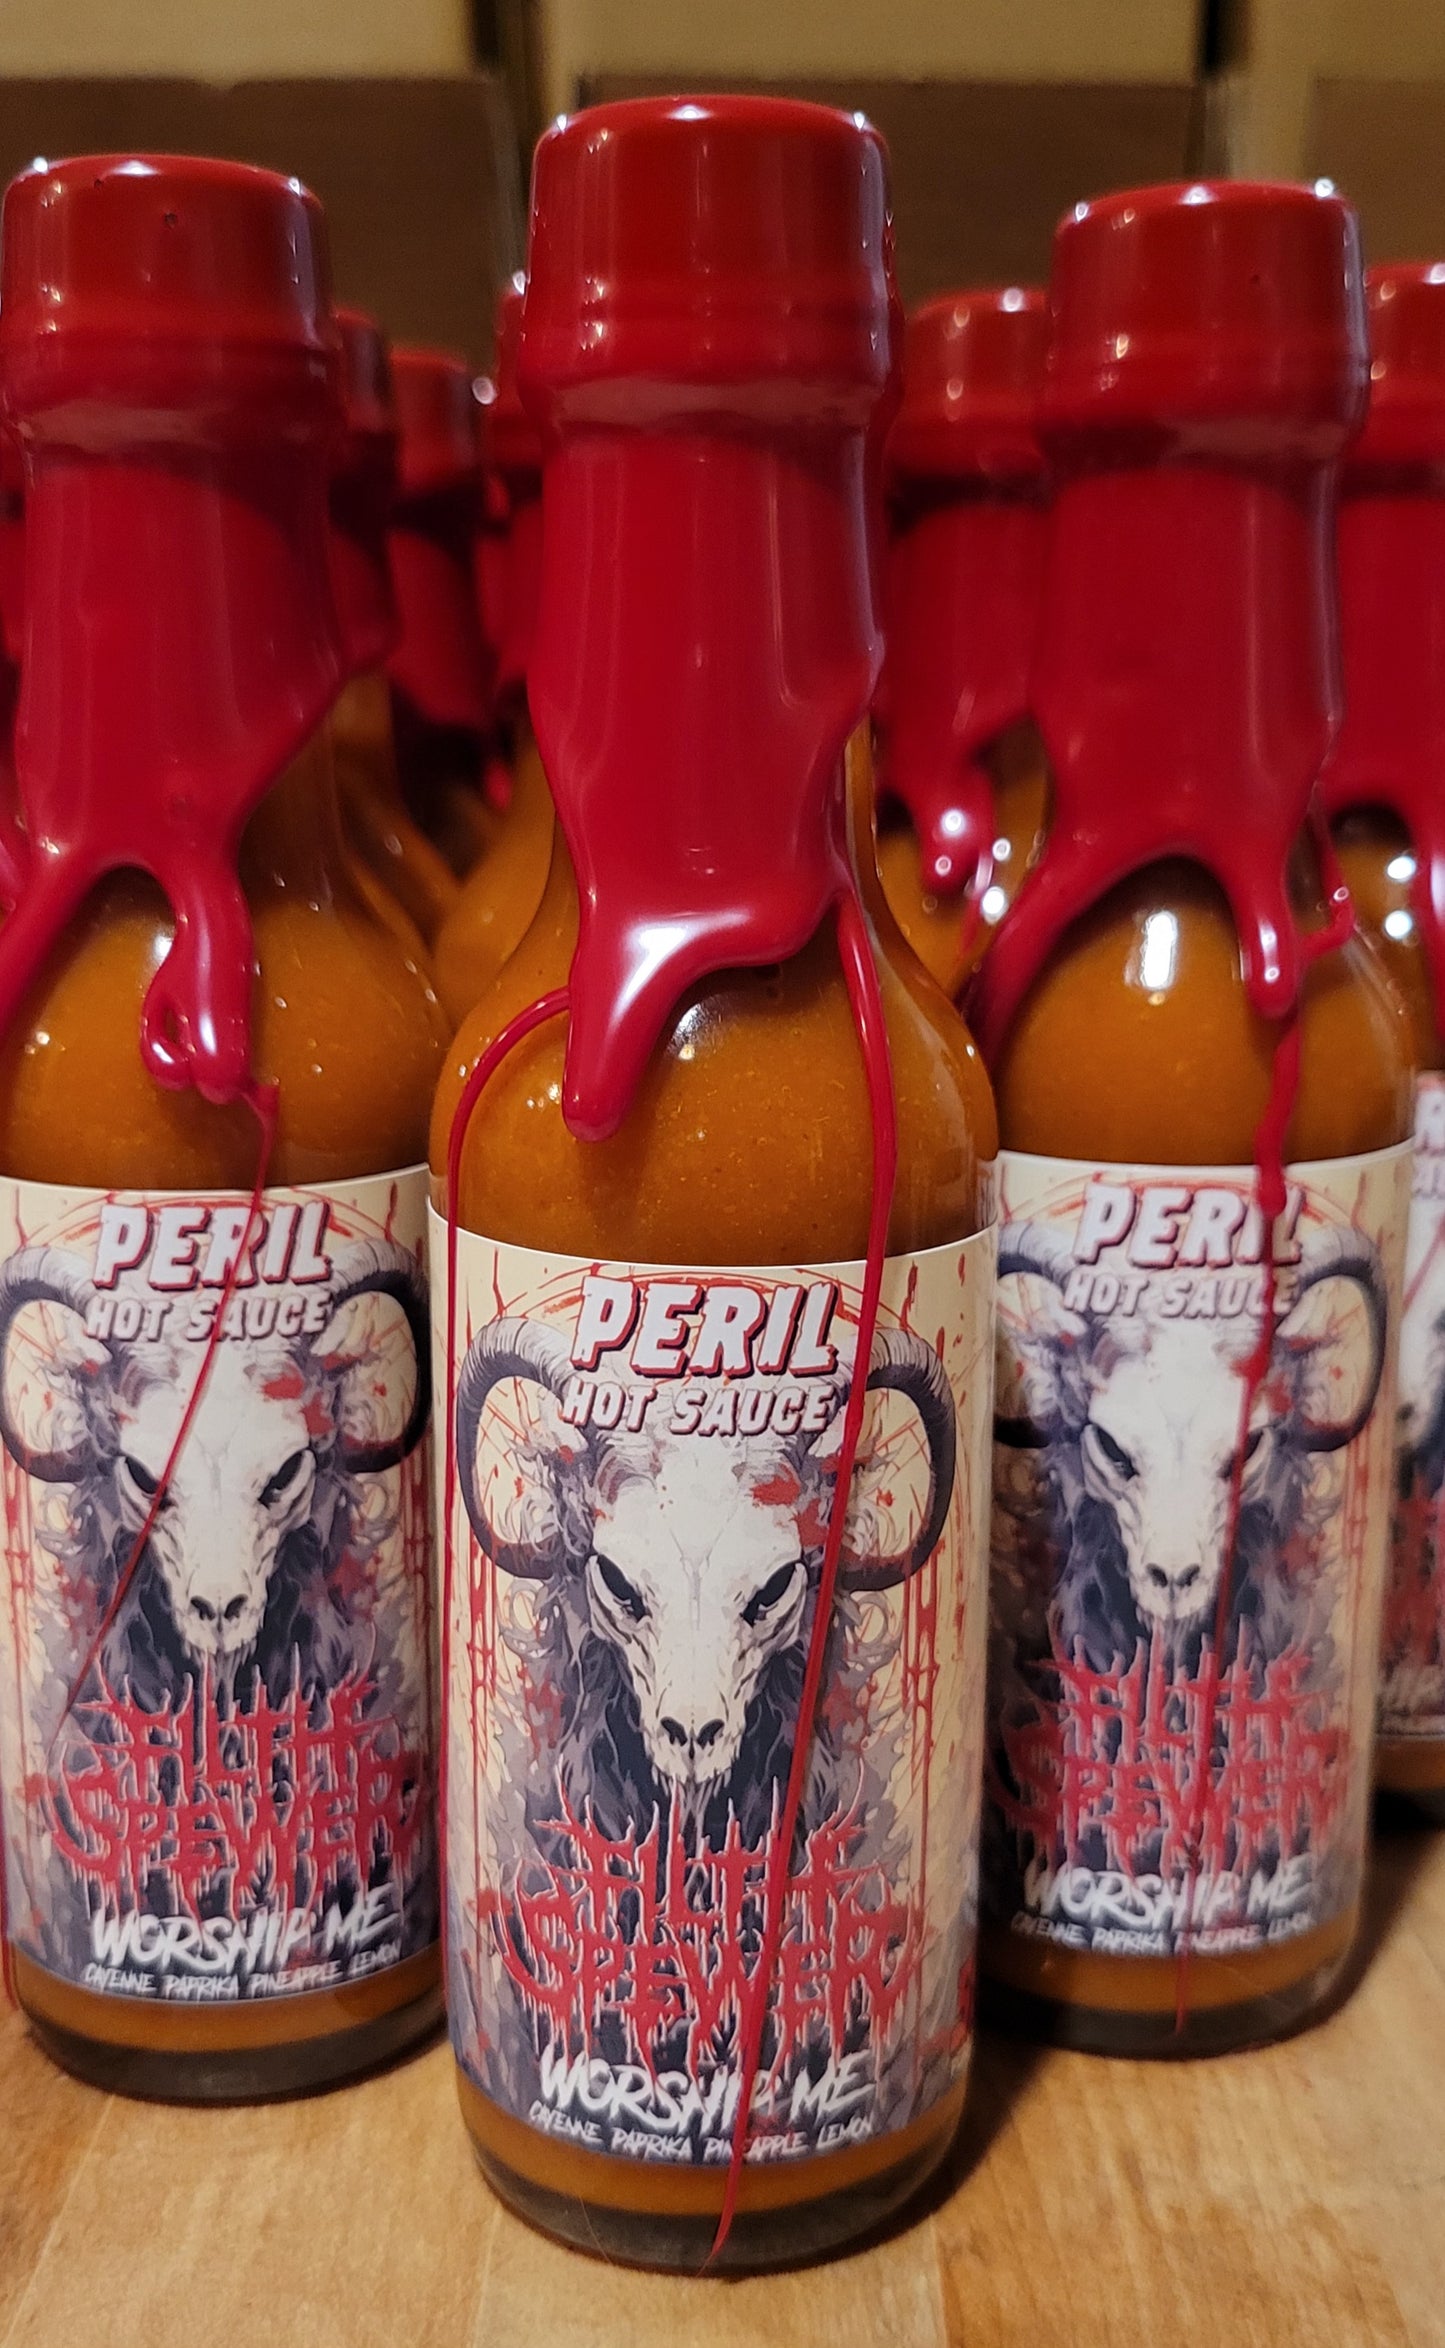 FILTH SPEWER - Worship Me Special Edition wax dipped bottle